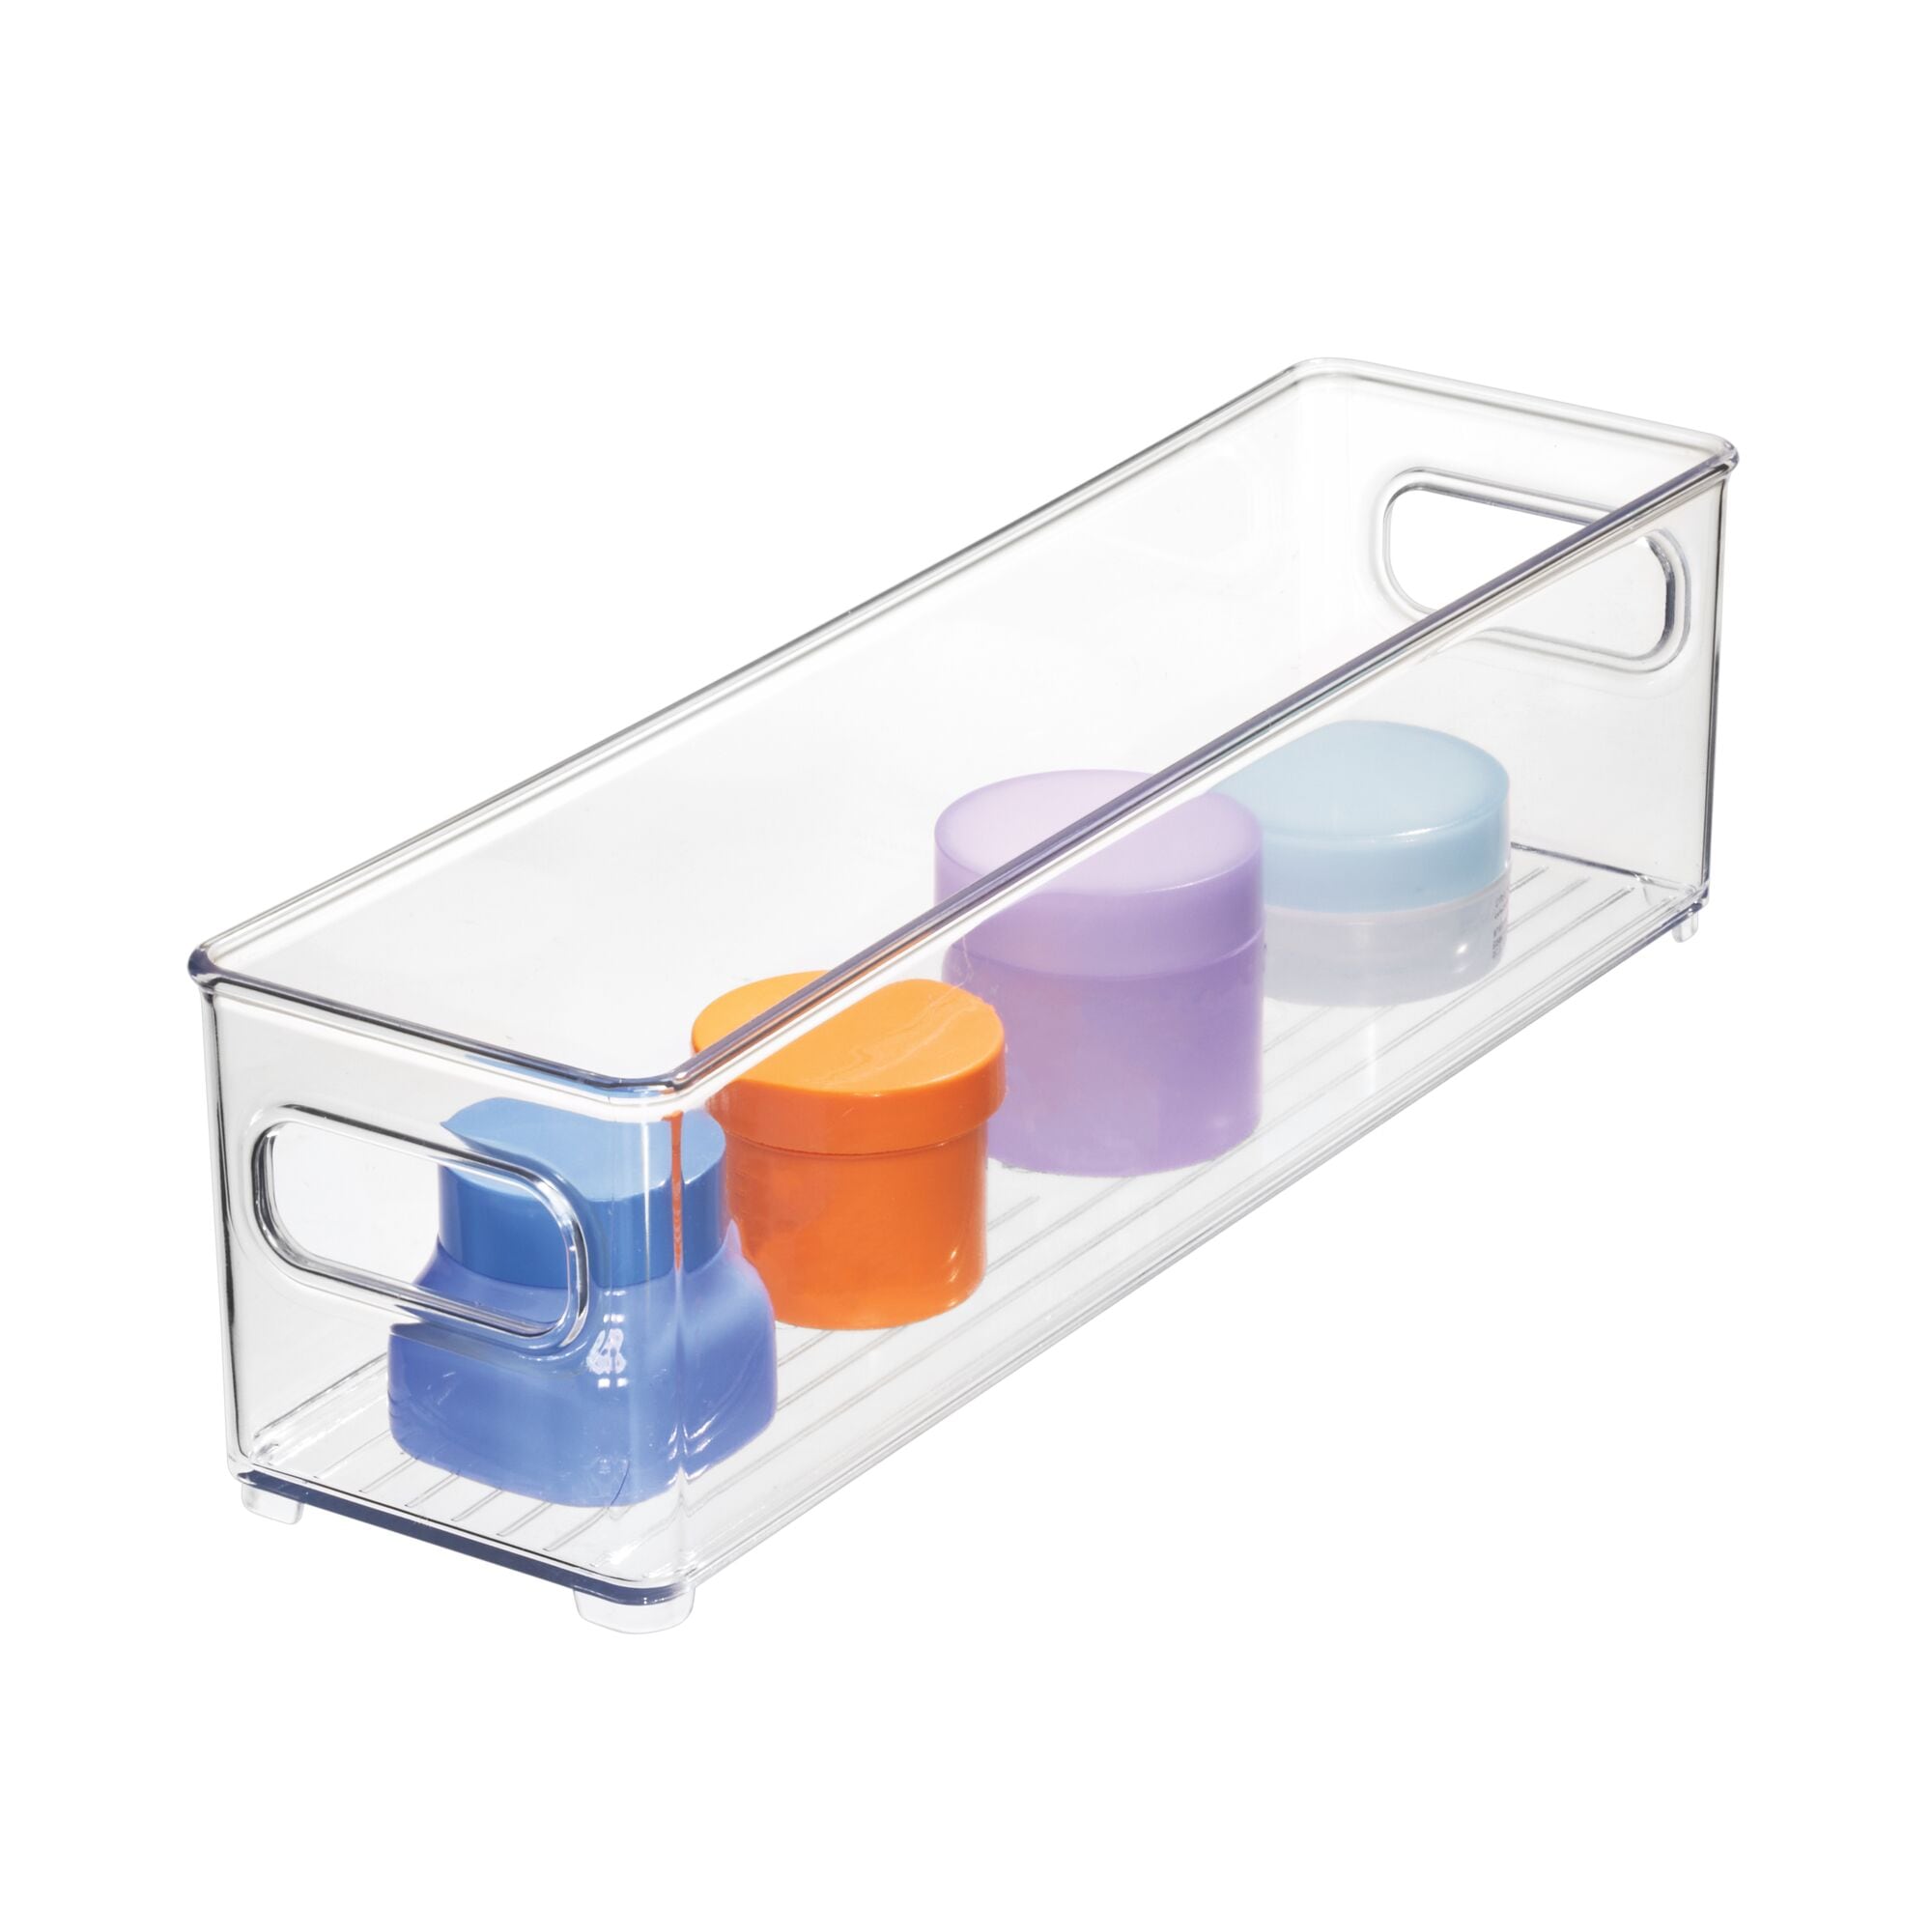 Plastic Handy Storage Baskets Stackable Organizer Toy Tool Fruit Tidy Container 